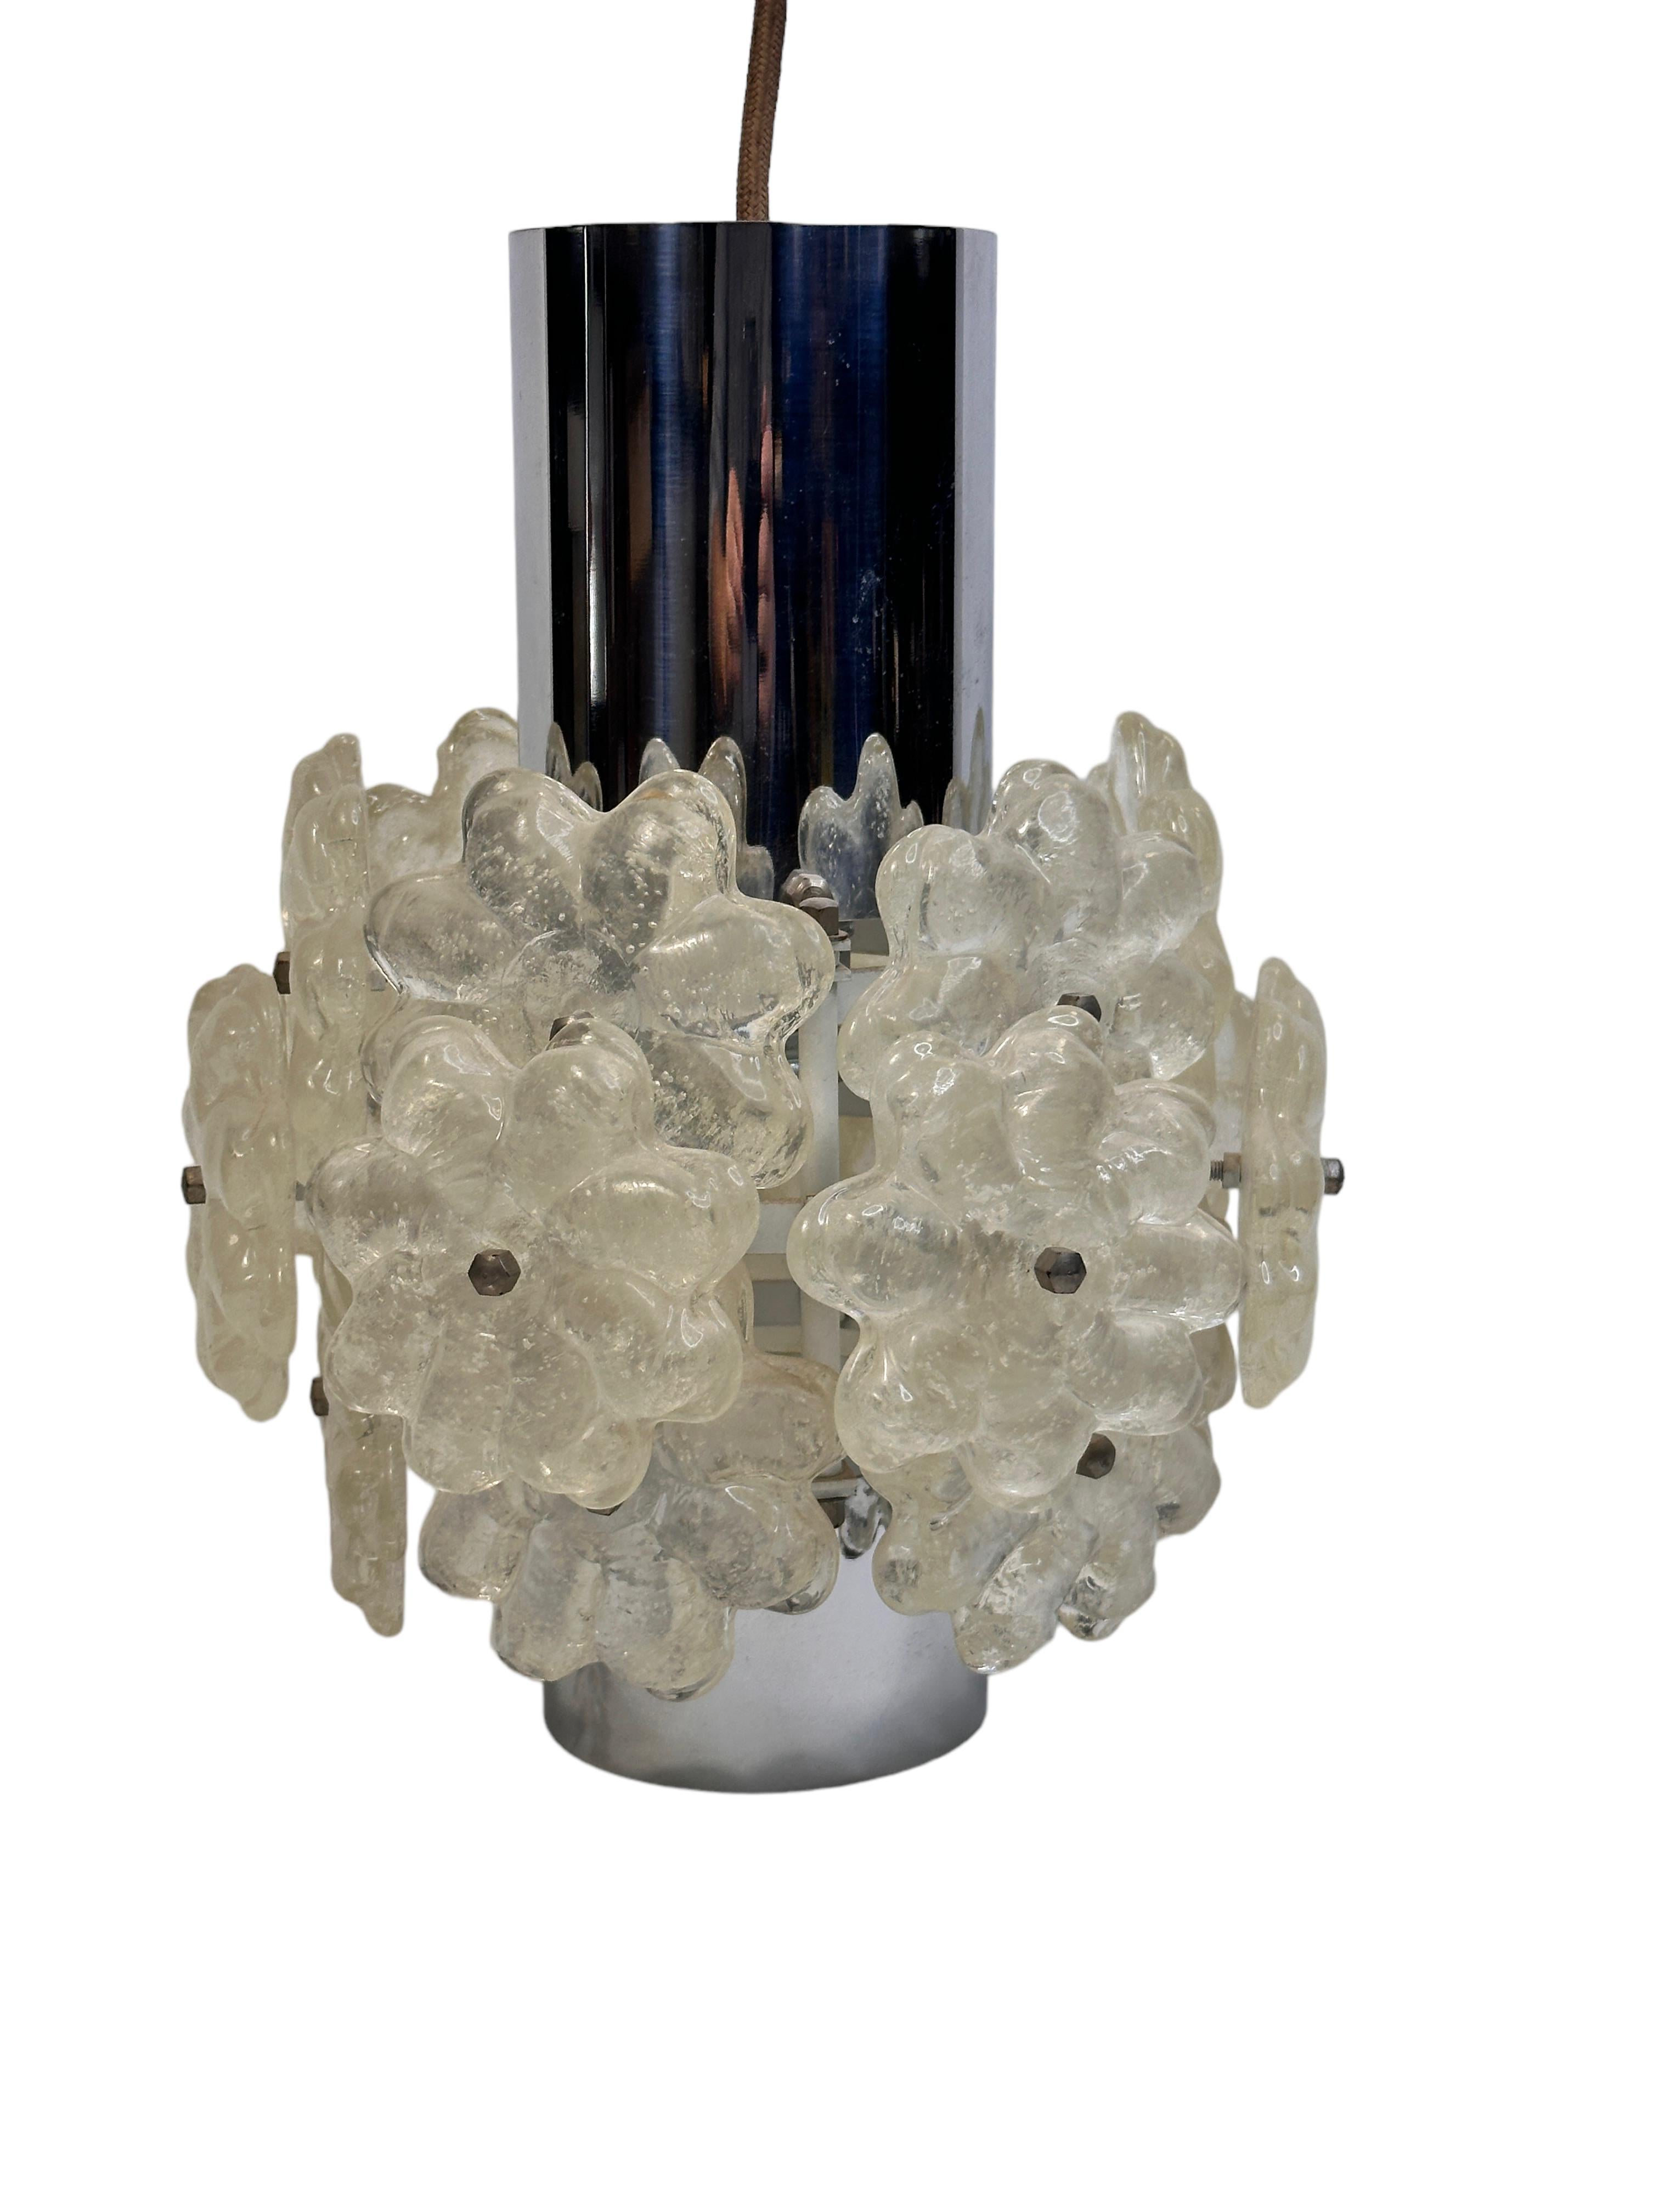 1 of 6 Chrome Pendant Fixture with Lucite Flower Clusters by Kalmar Austria 1960 For Sale 4